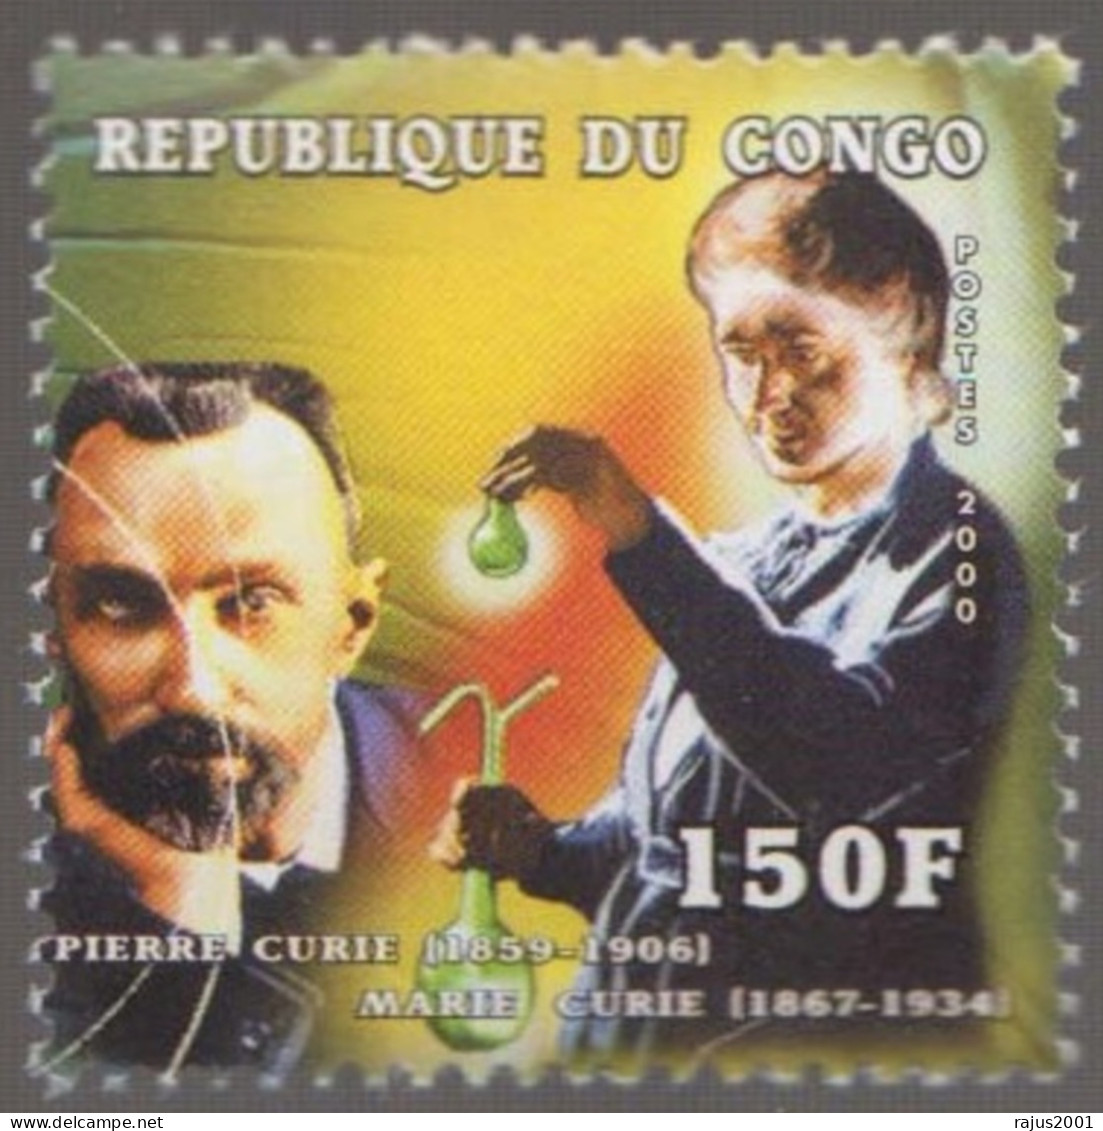 Pierre And Marie Curie, Discovery Of Radium And Polonium Nobel Prize Cancer Disease Chemistry Physics MNH Congo - Chimica